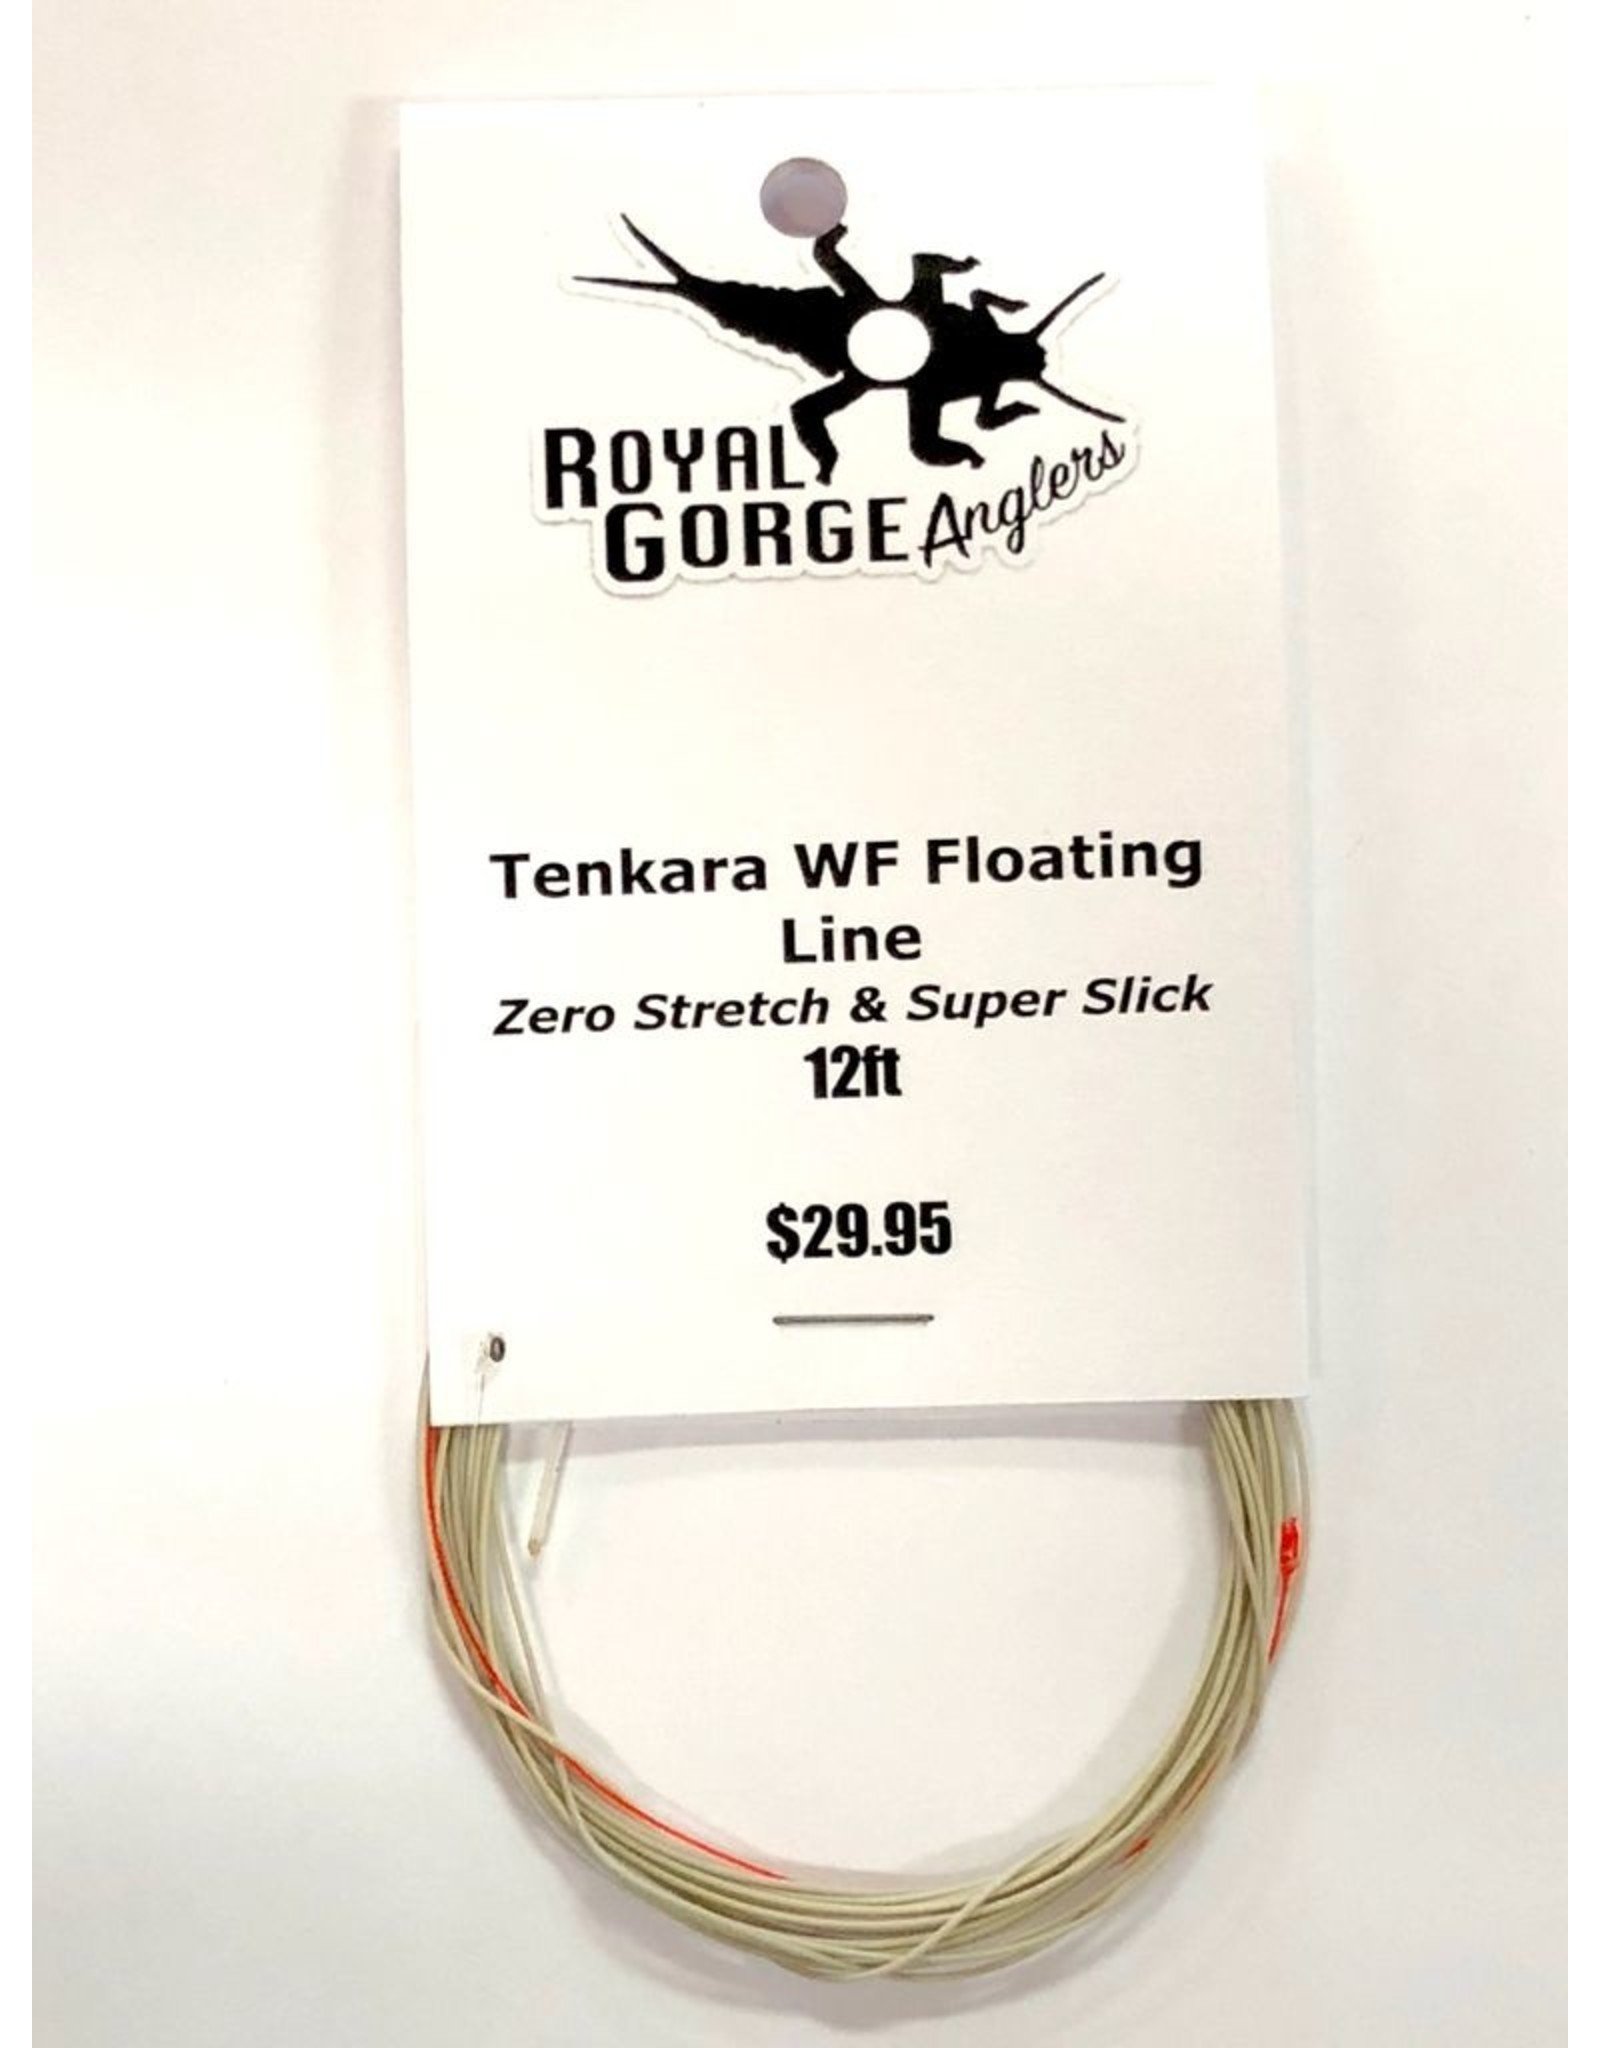 A Tactical Floating Line Ready to Go - Royal Gorge Anglers